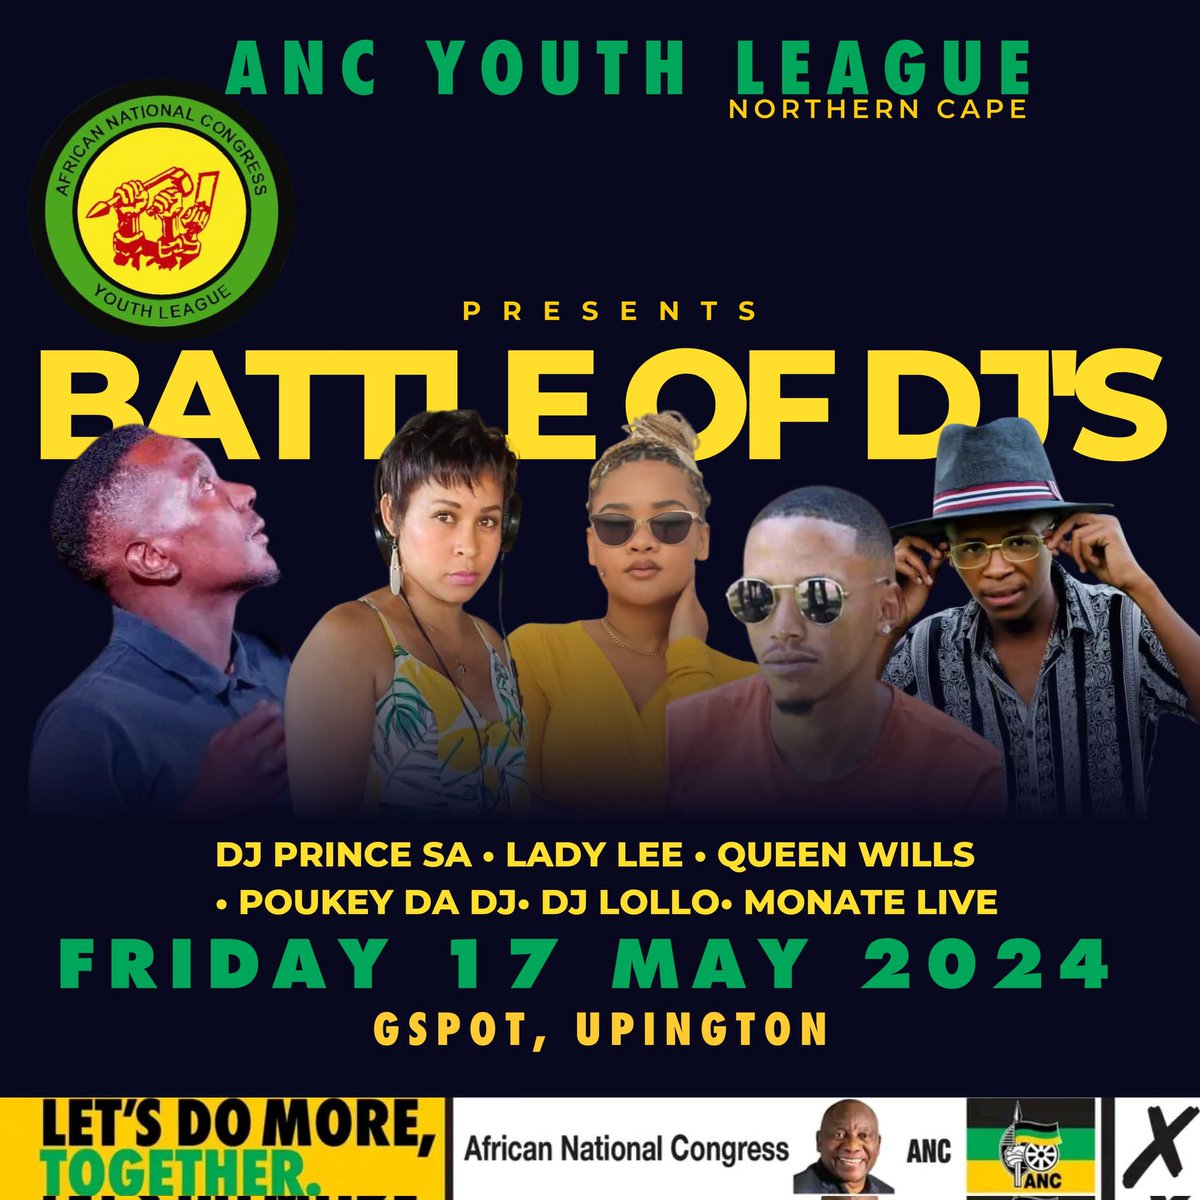 The ANC Youth League is hosting a social invasion and SIYANQOBA battle of the DJs, featuring an all local lineup: DJ Prince SA Lady D Queen Wills - Poukey The DJ - Monate Live This thing is big🖤💚💛 #VoteANC2024 #ANCYLatWork #ANCYL_NCAPE #LetsDoMoreTogether #IAmANC #MyANC